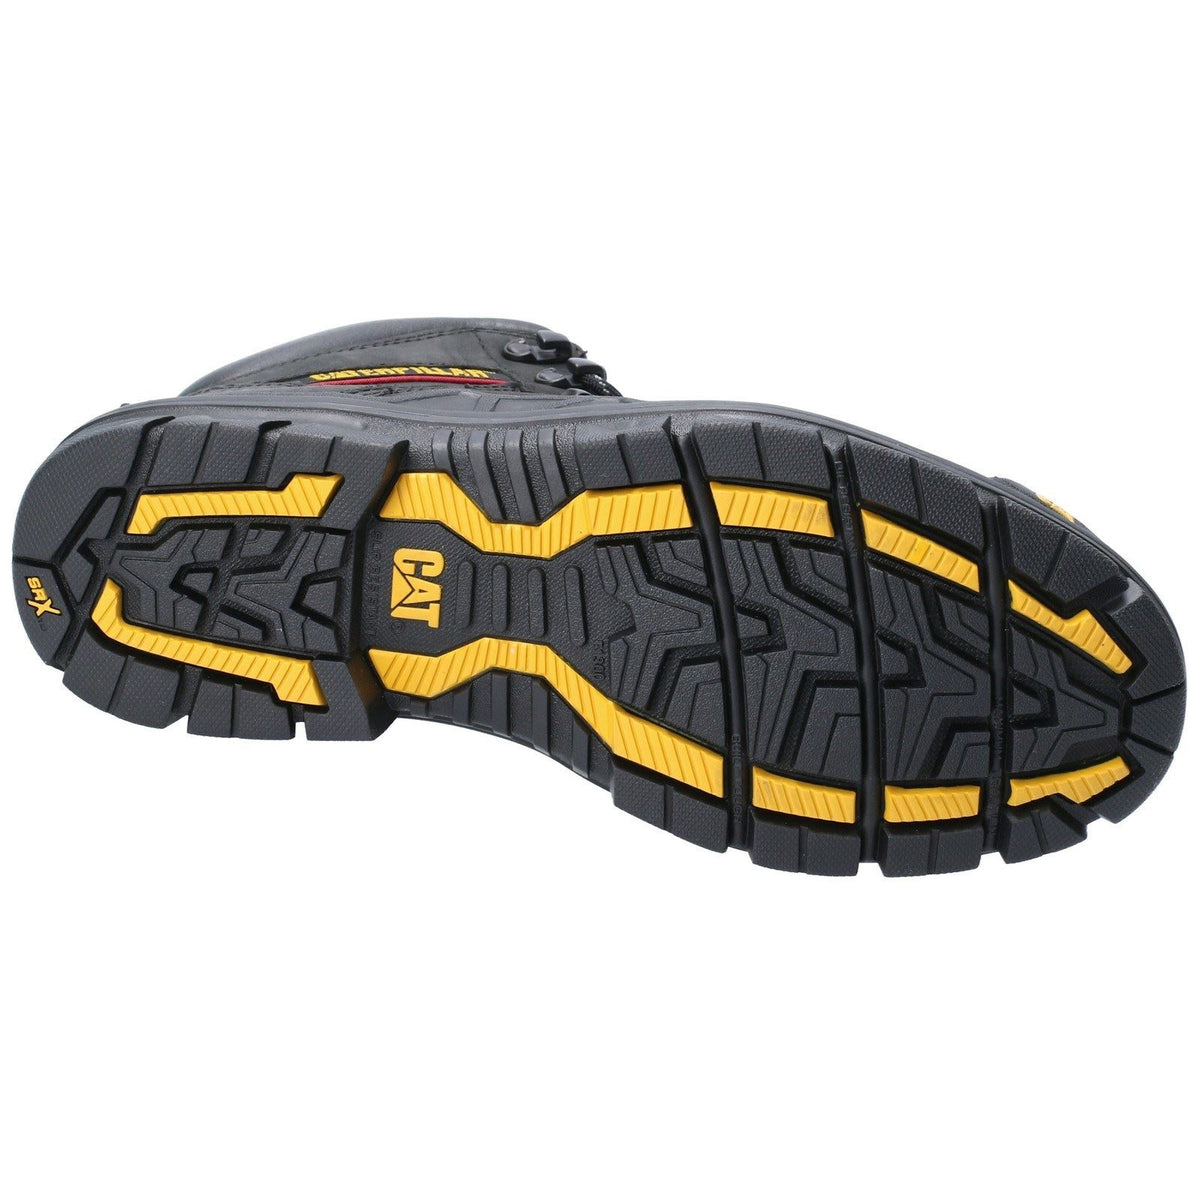 Caterpillar Bearing Lace Up Safety Boots